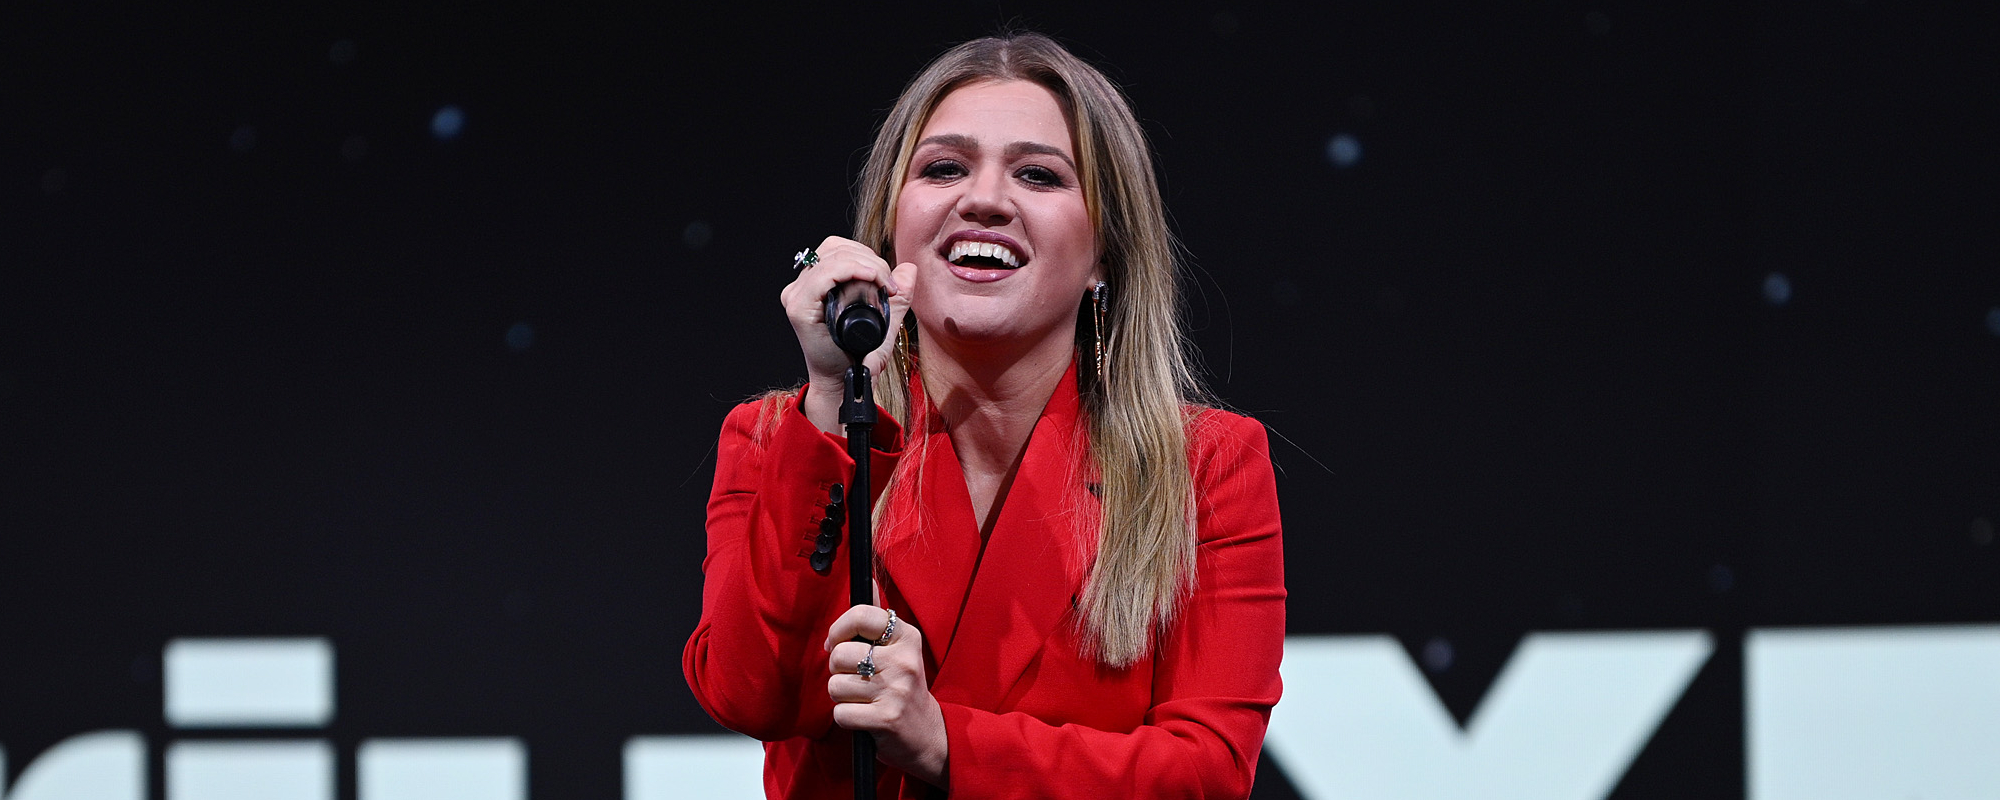 Kelly Clarkson Reveals the Health Diagnosis that Motivated Her Recent Transformation